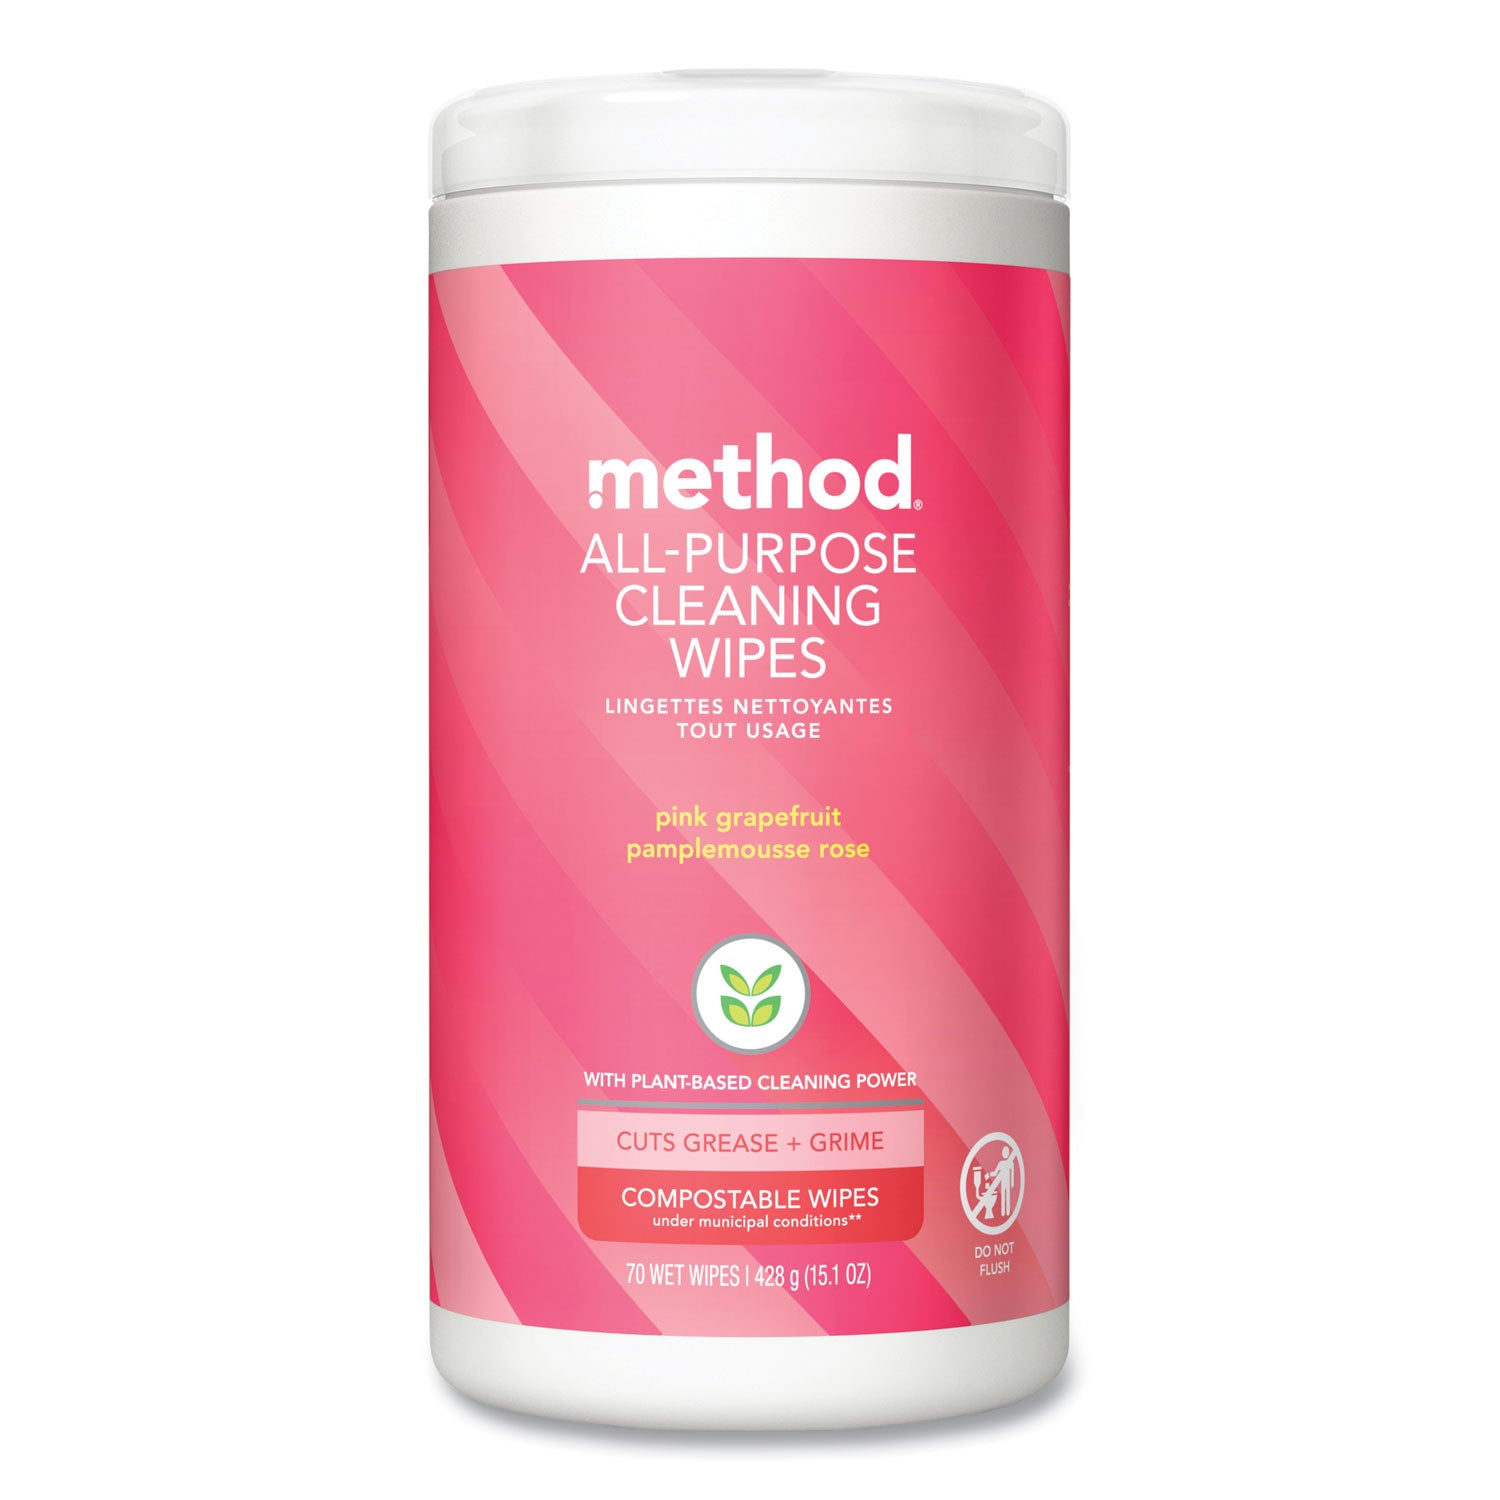 all-purpose-cleaning-wipes-1-ply-pink-grapefruit-white-70-canister-6-carton_mth338527 - 1